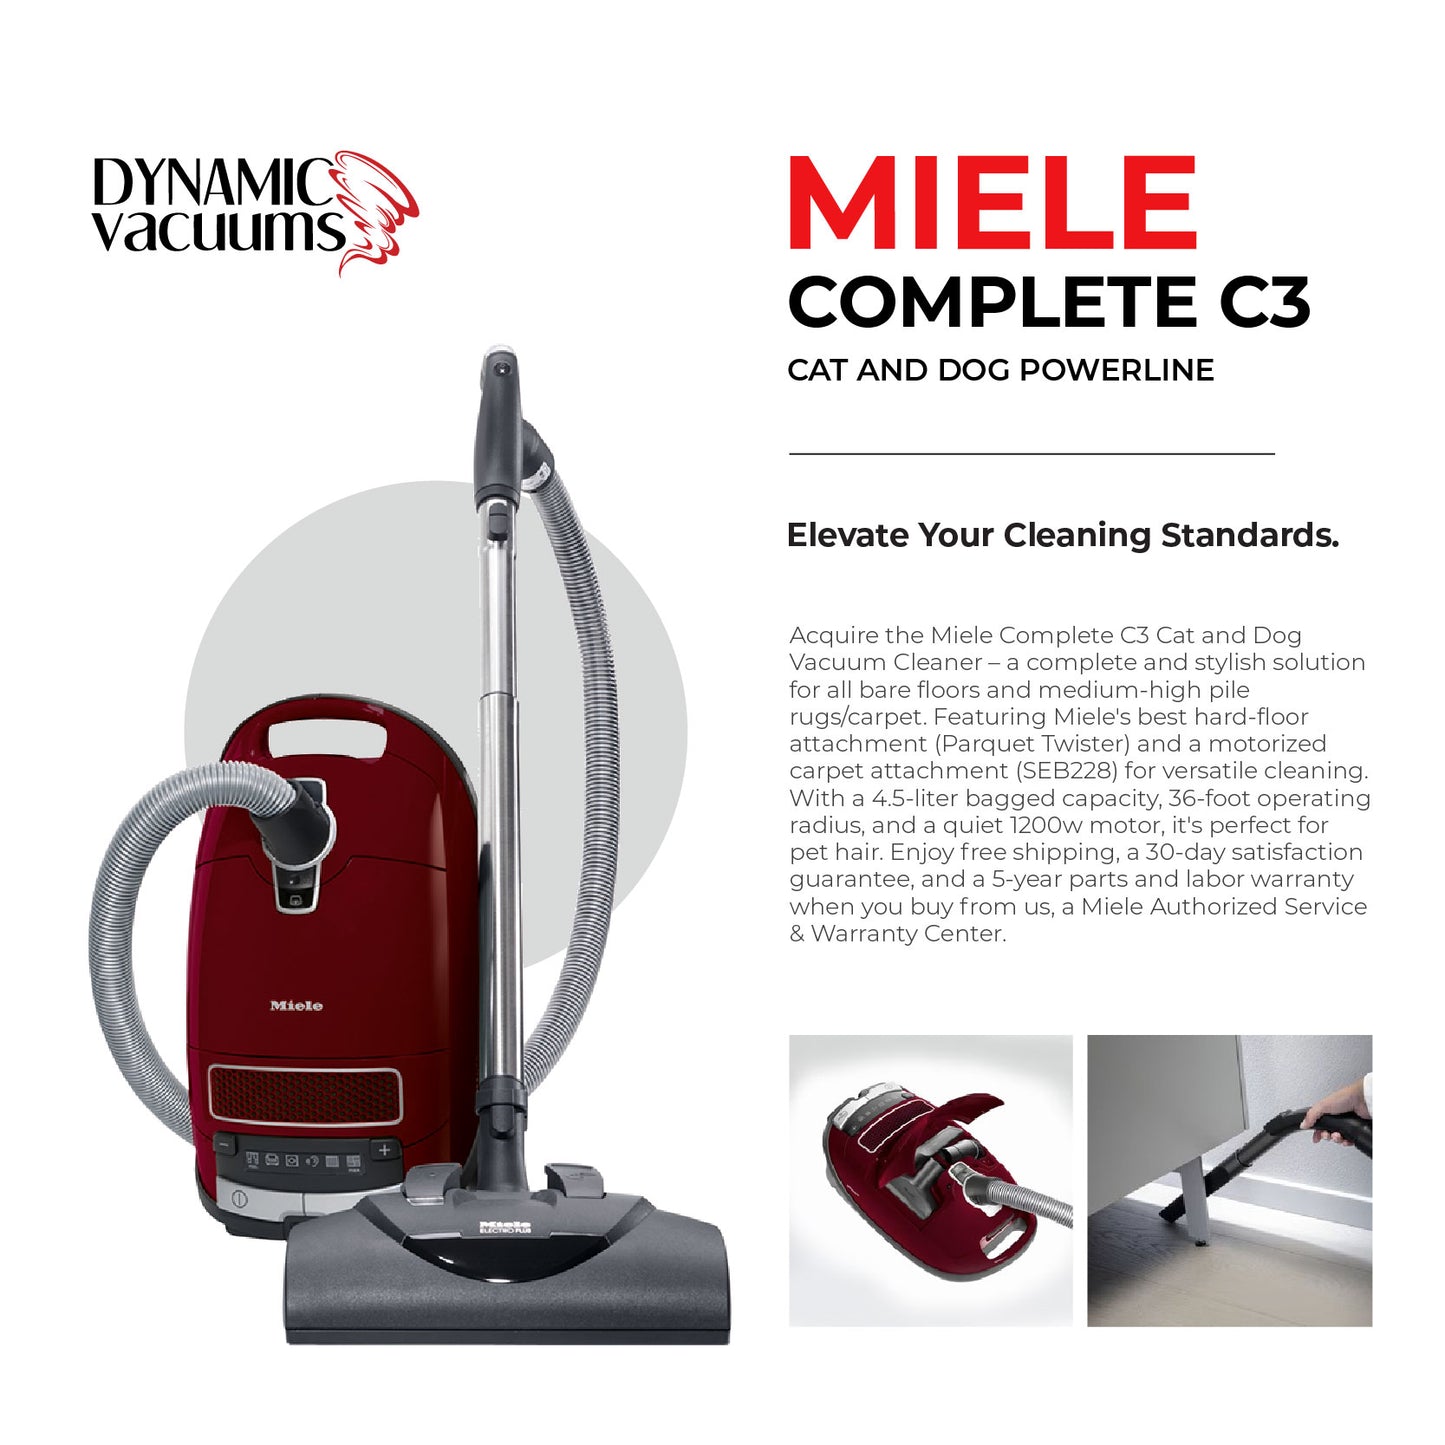 Miele Complete C3 Cat and Dog PowerLine